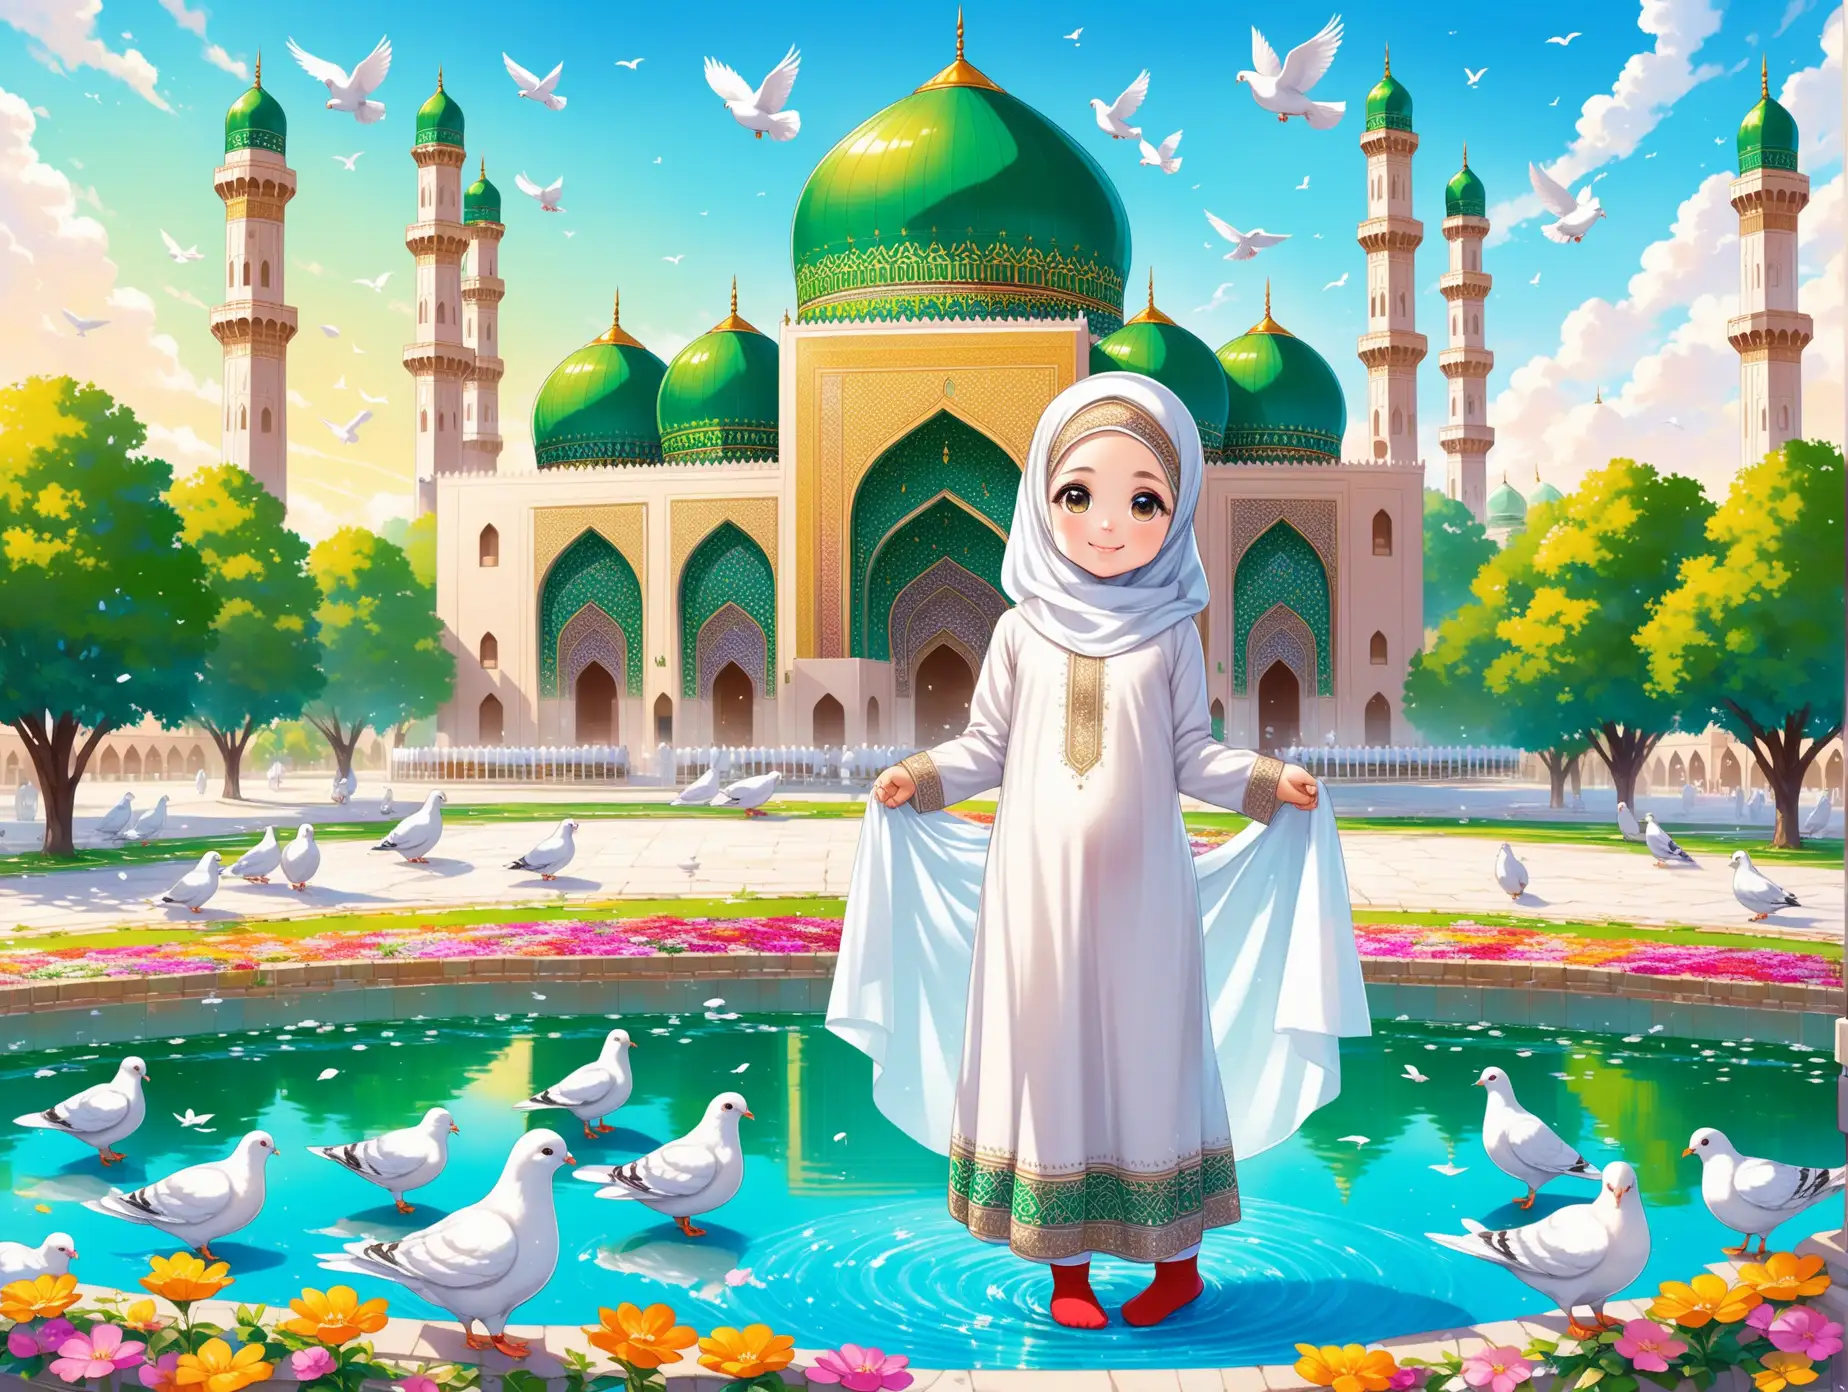 Character Persian little girl(full height, Big white flag in one hand proudly, Muslim, baby face, with emphasis no hair out of veil(Hijab), smaller eyes, bigger nose, white skin, cute, smiling, wearing socks, clothes full of Persian designs).

Atmosphere beautiful Jamkaran mosque, yard, green dome, colorful flowers, pond with water fountain, many pigeons, nobody.